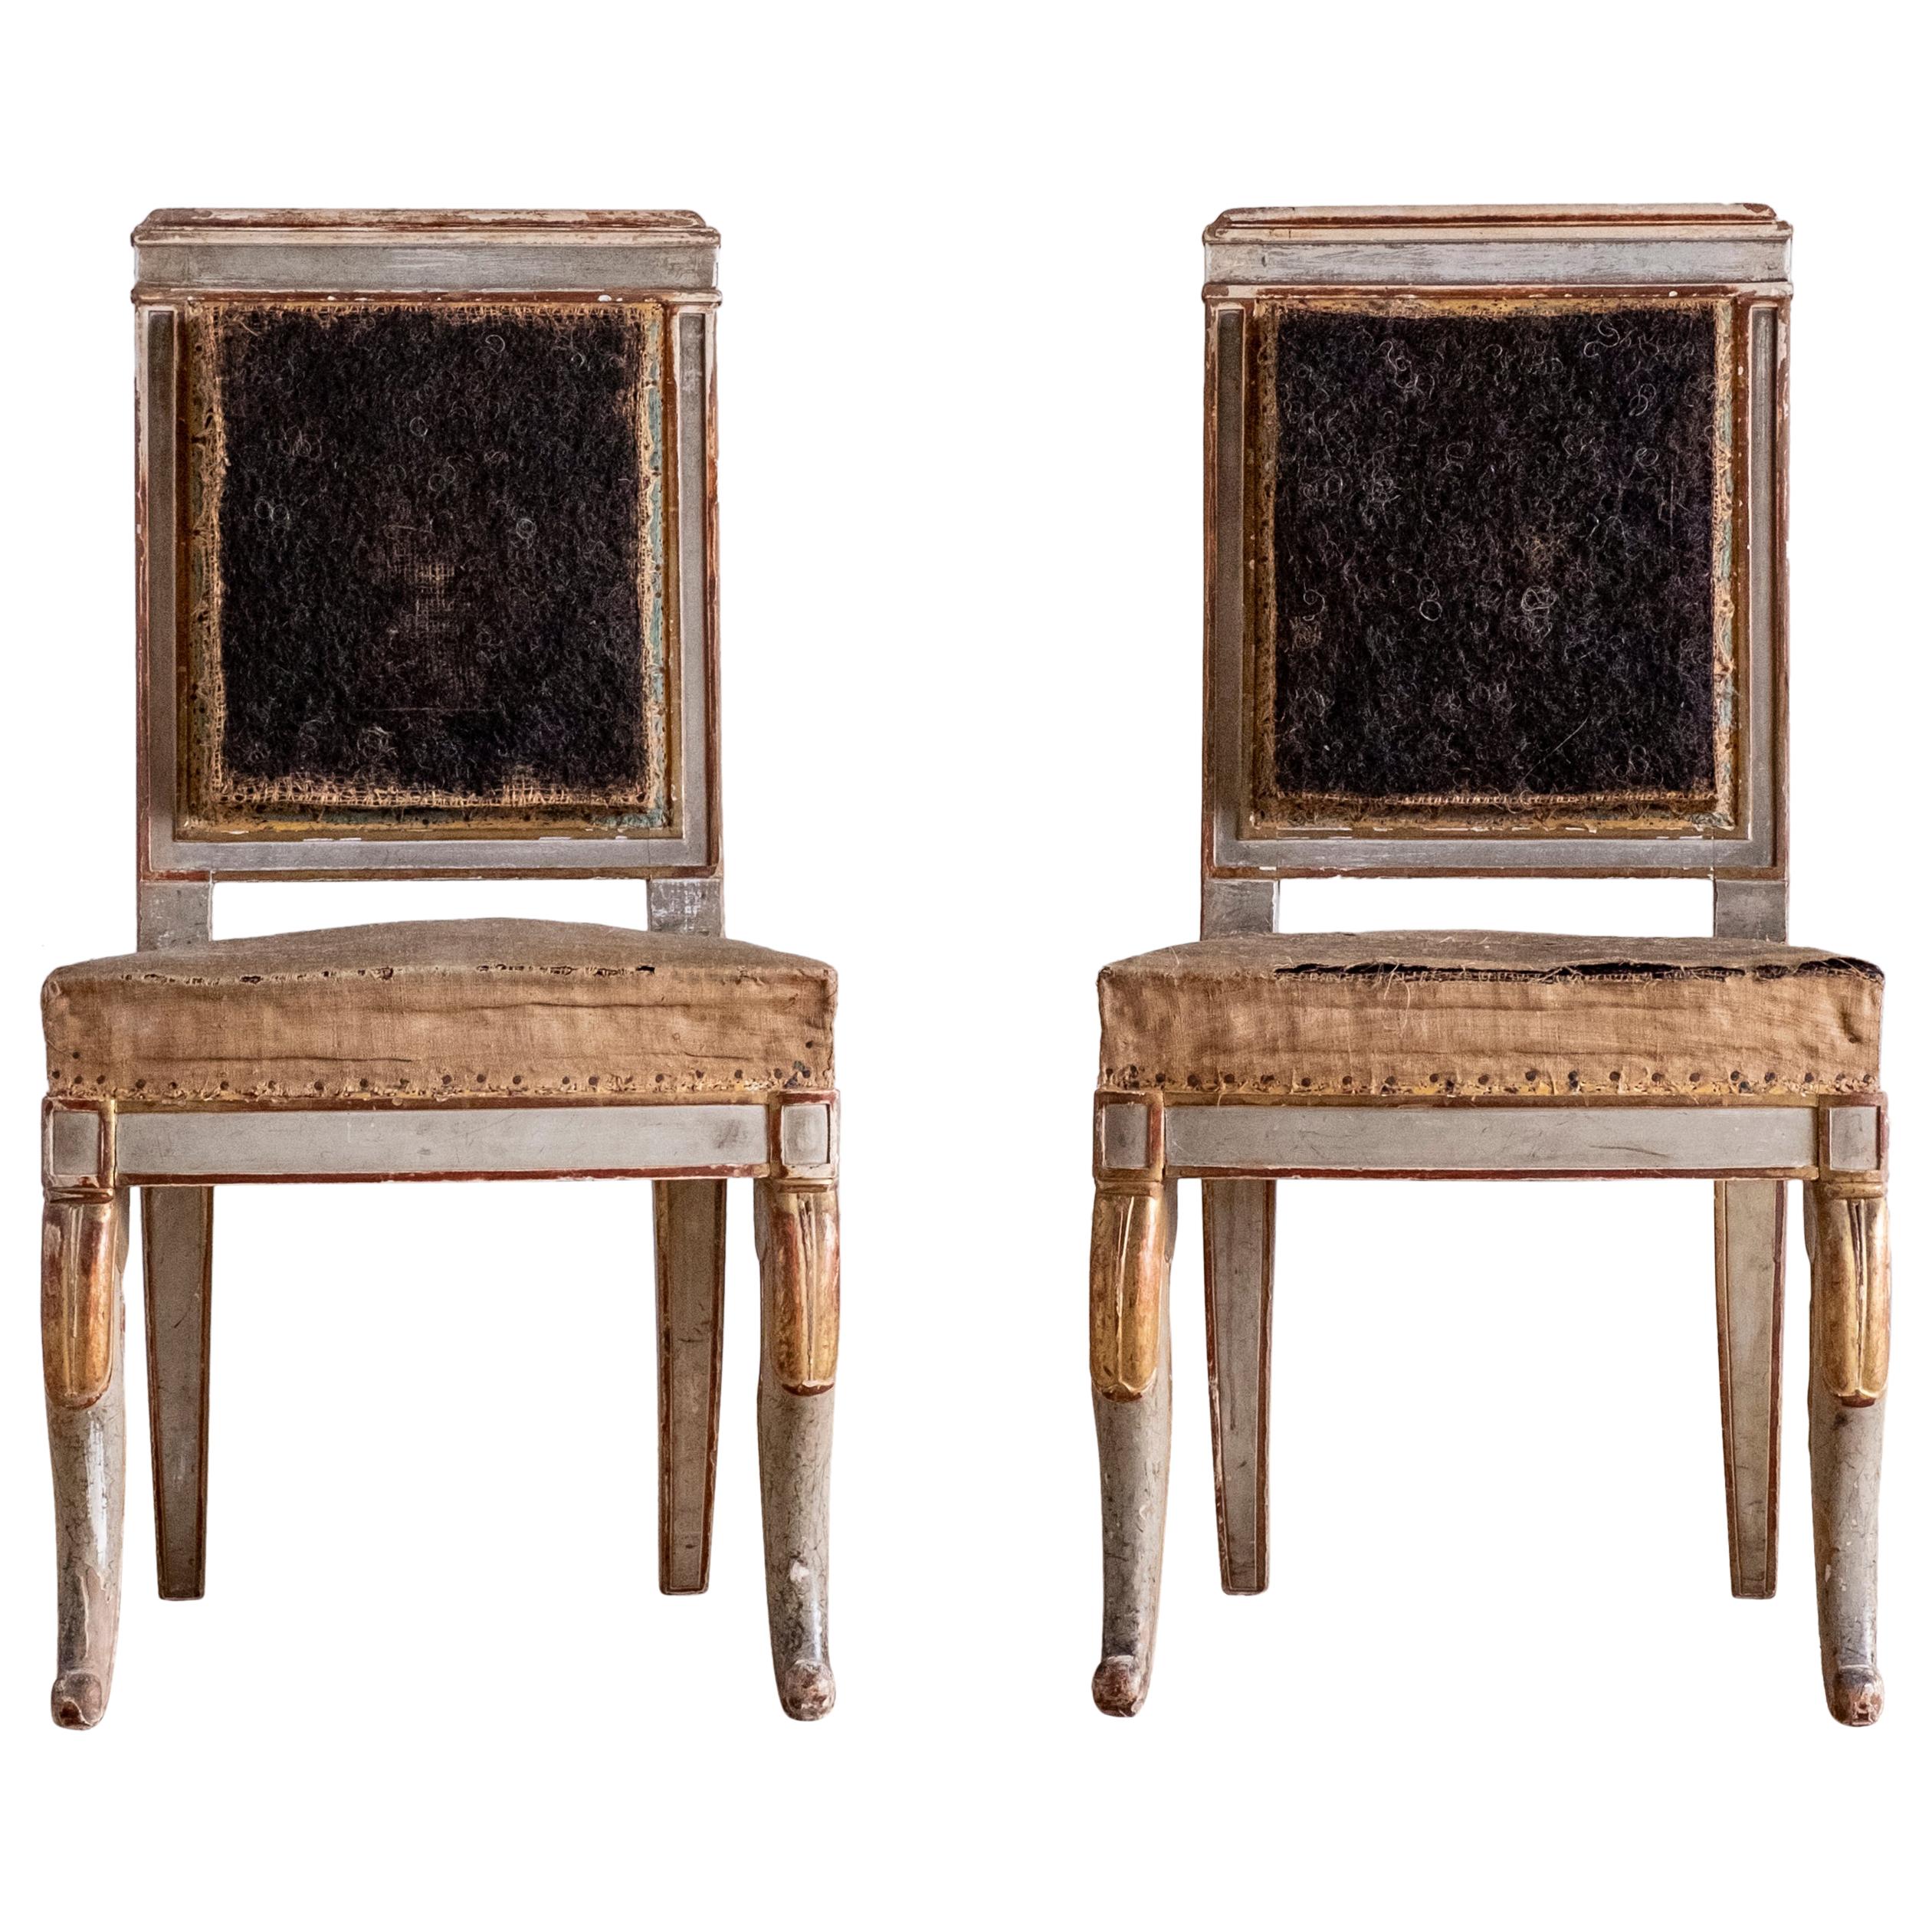 Fine Pair of 19th Century French Empire Side Chairs